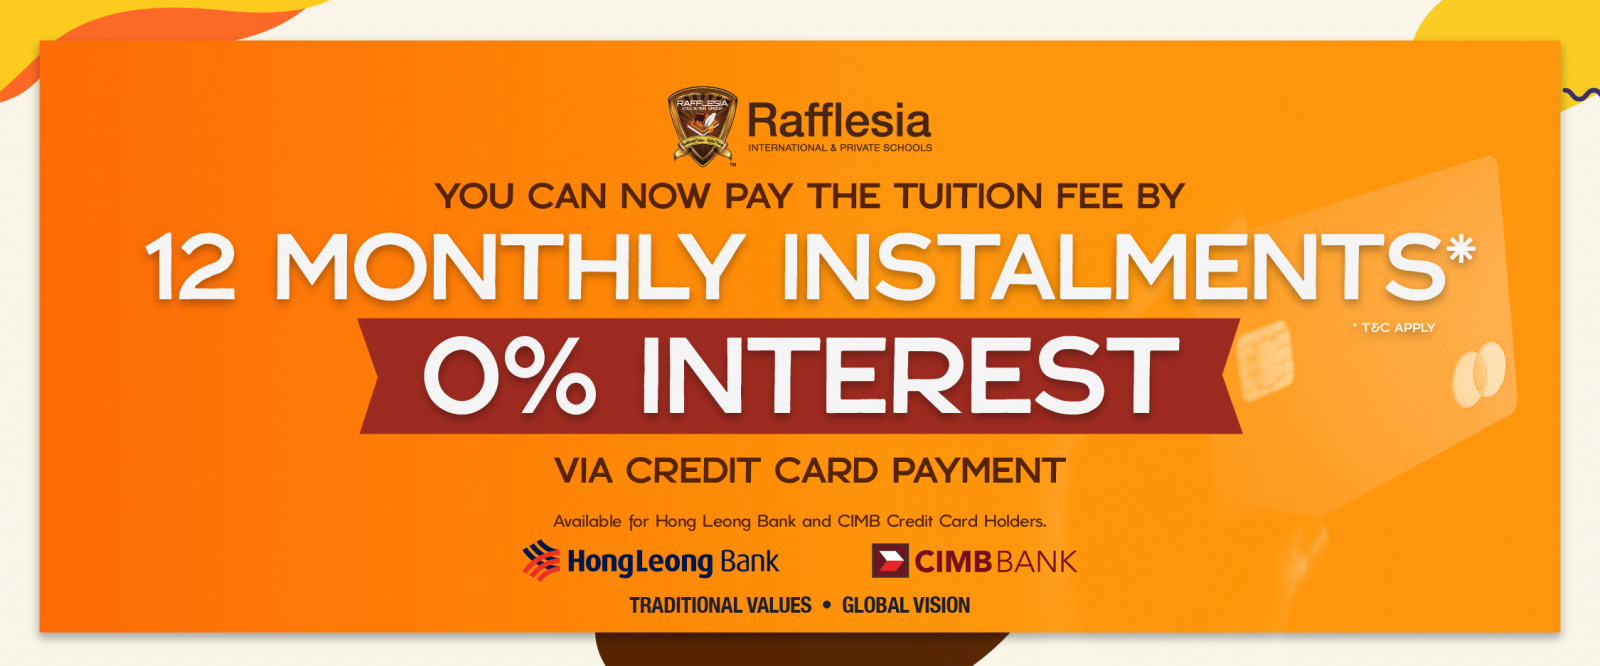 0% Interest For Up to 12 Months